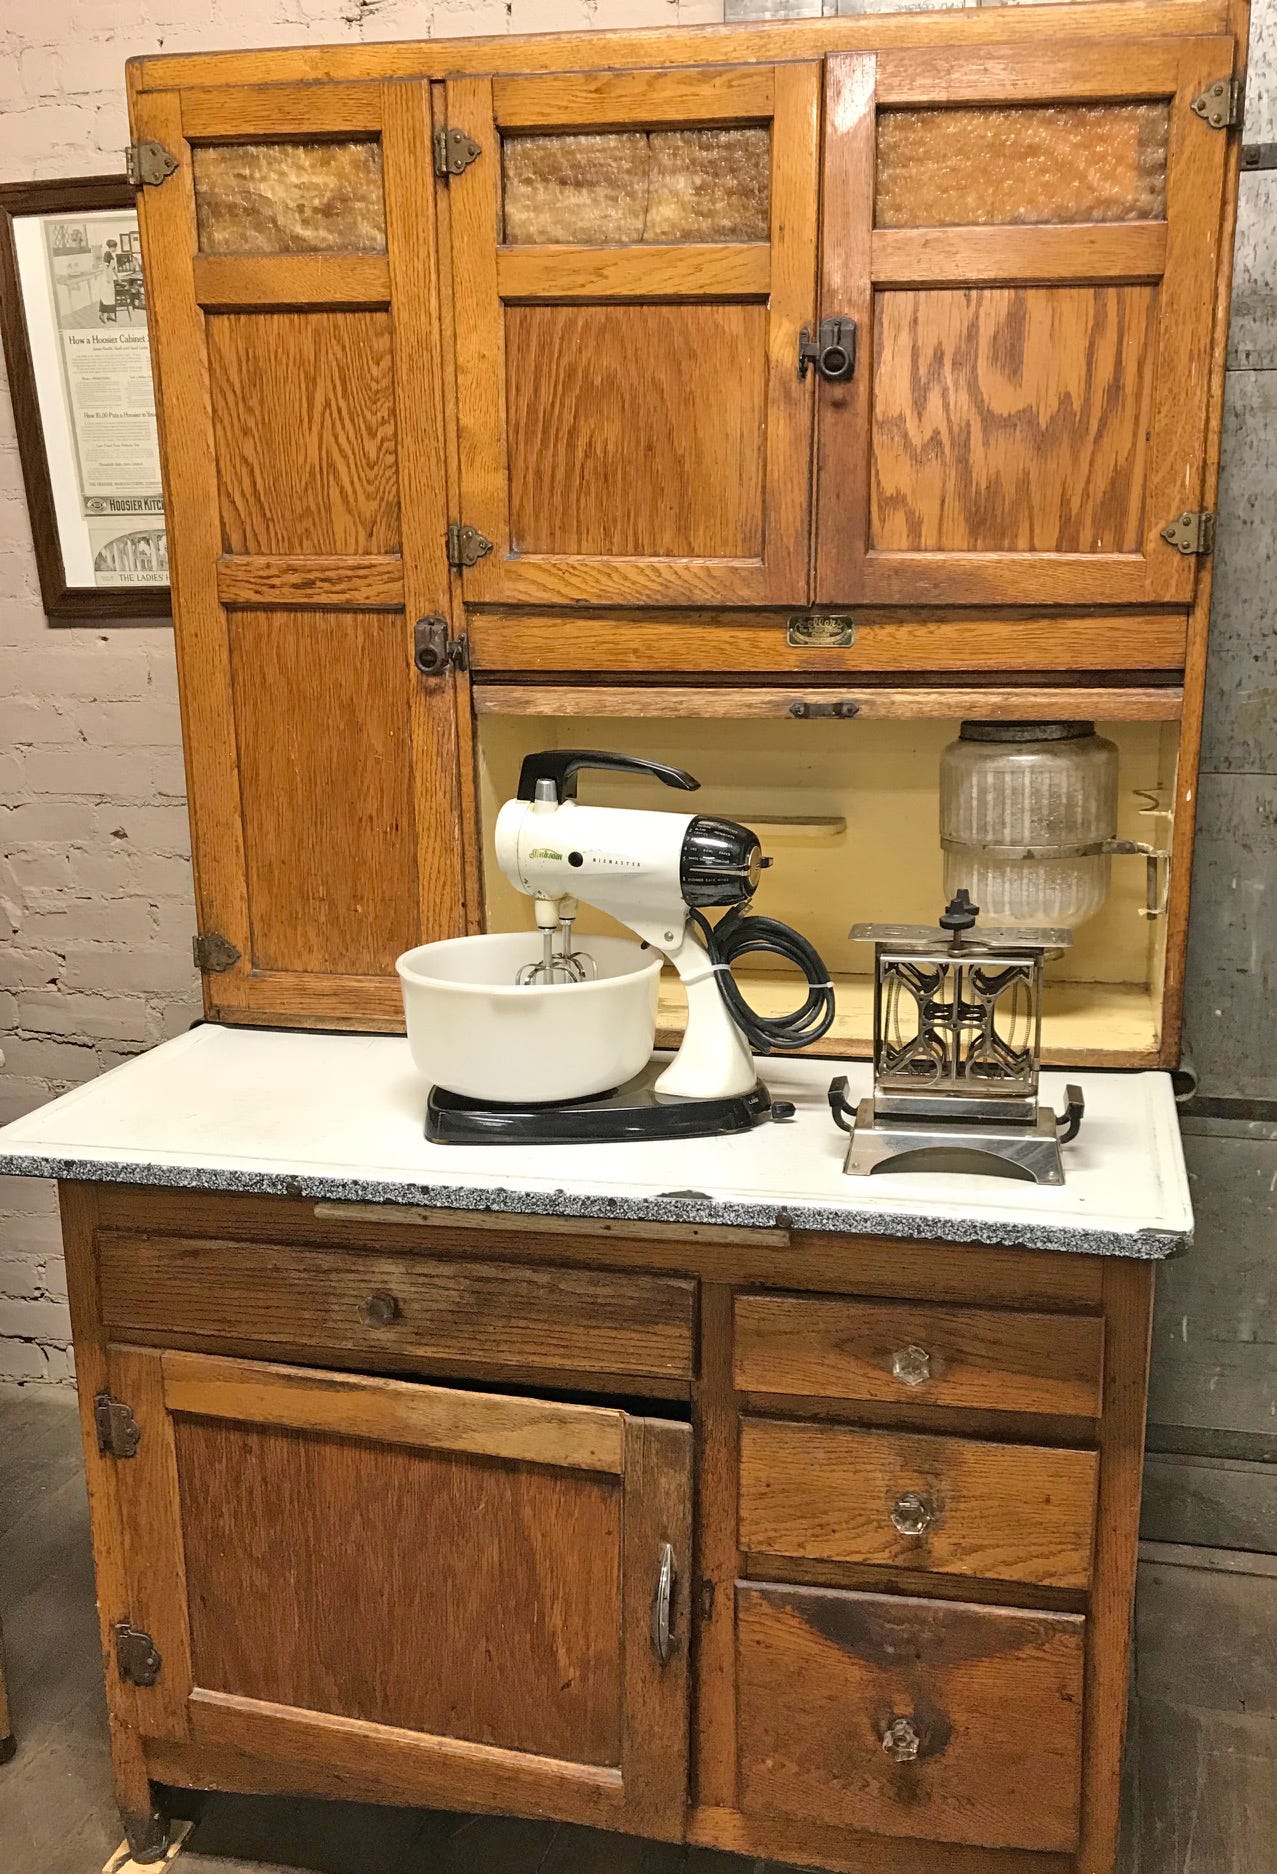 How The Hoosier Kitchen Cabinet Shaped The Way You Cook